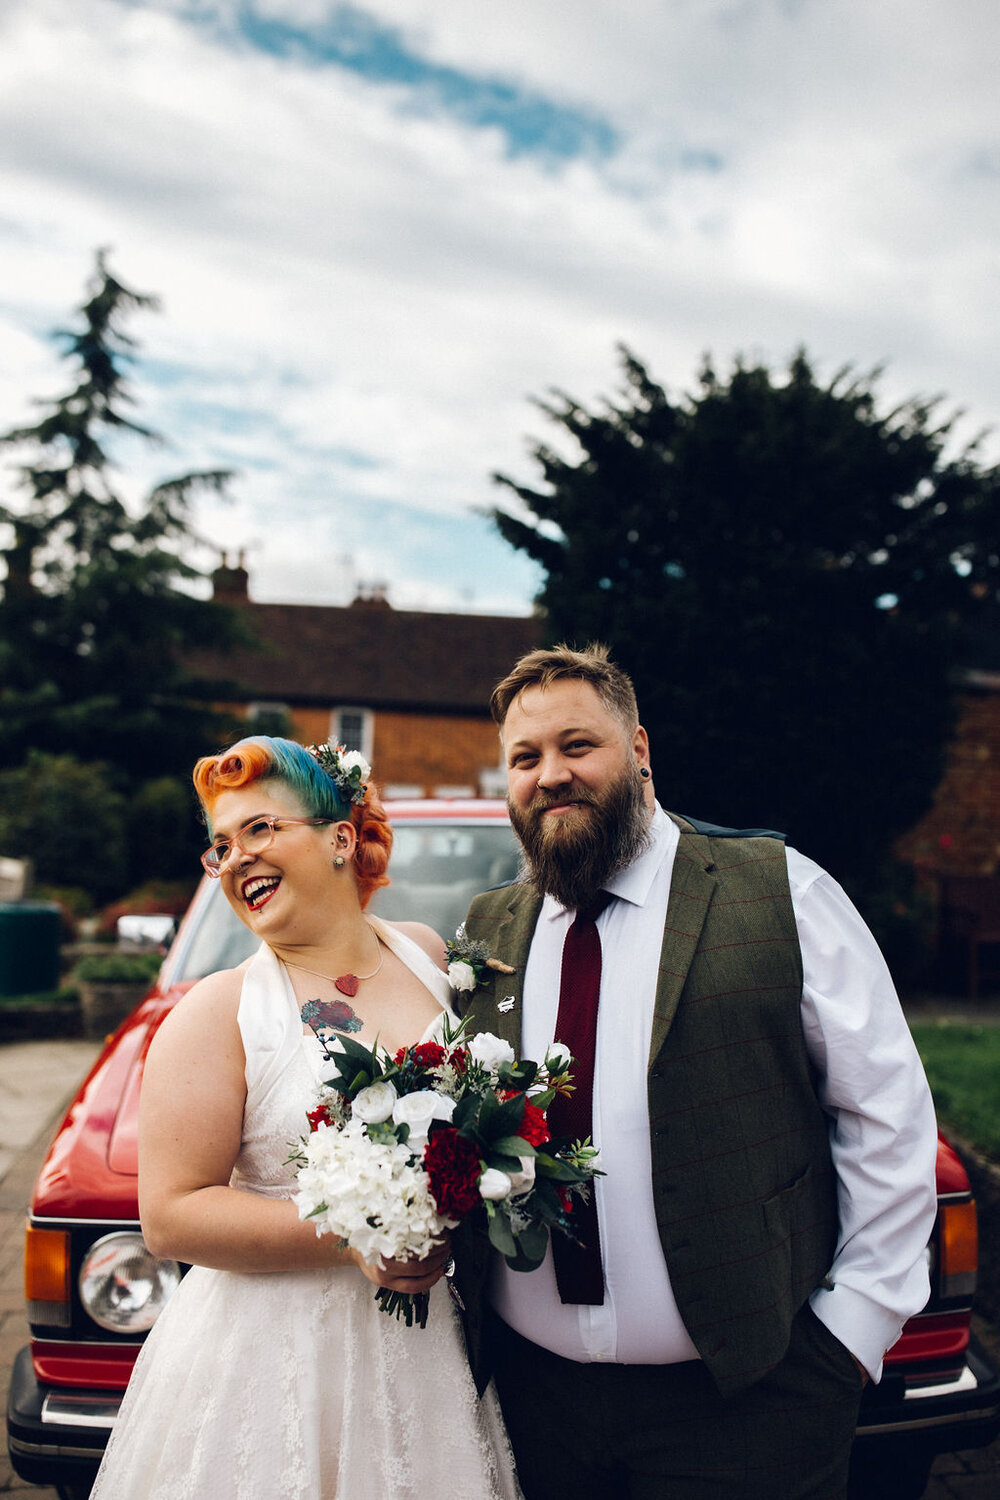 Bride with rainbow hair and groom outside - Intimate Essex wedding Old Parish Rooms